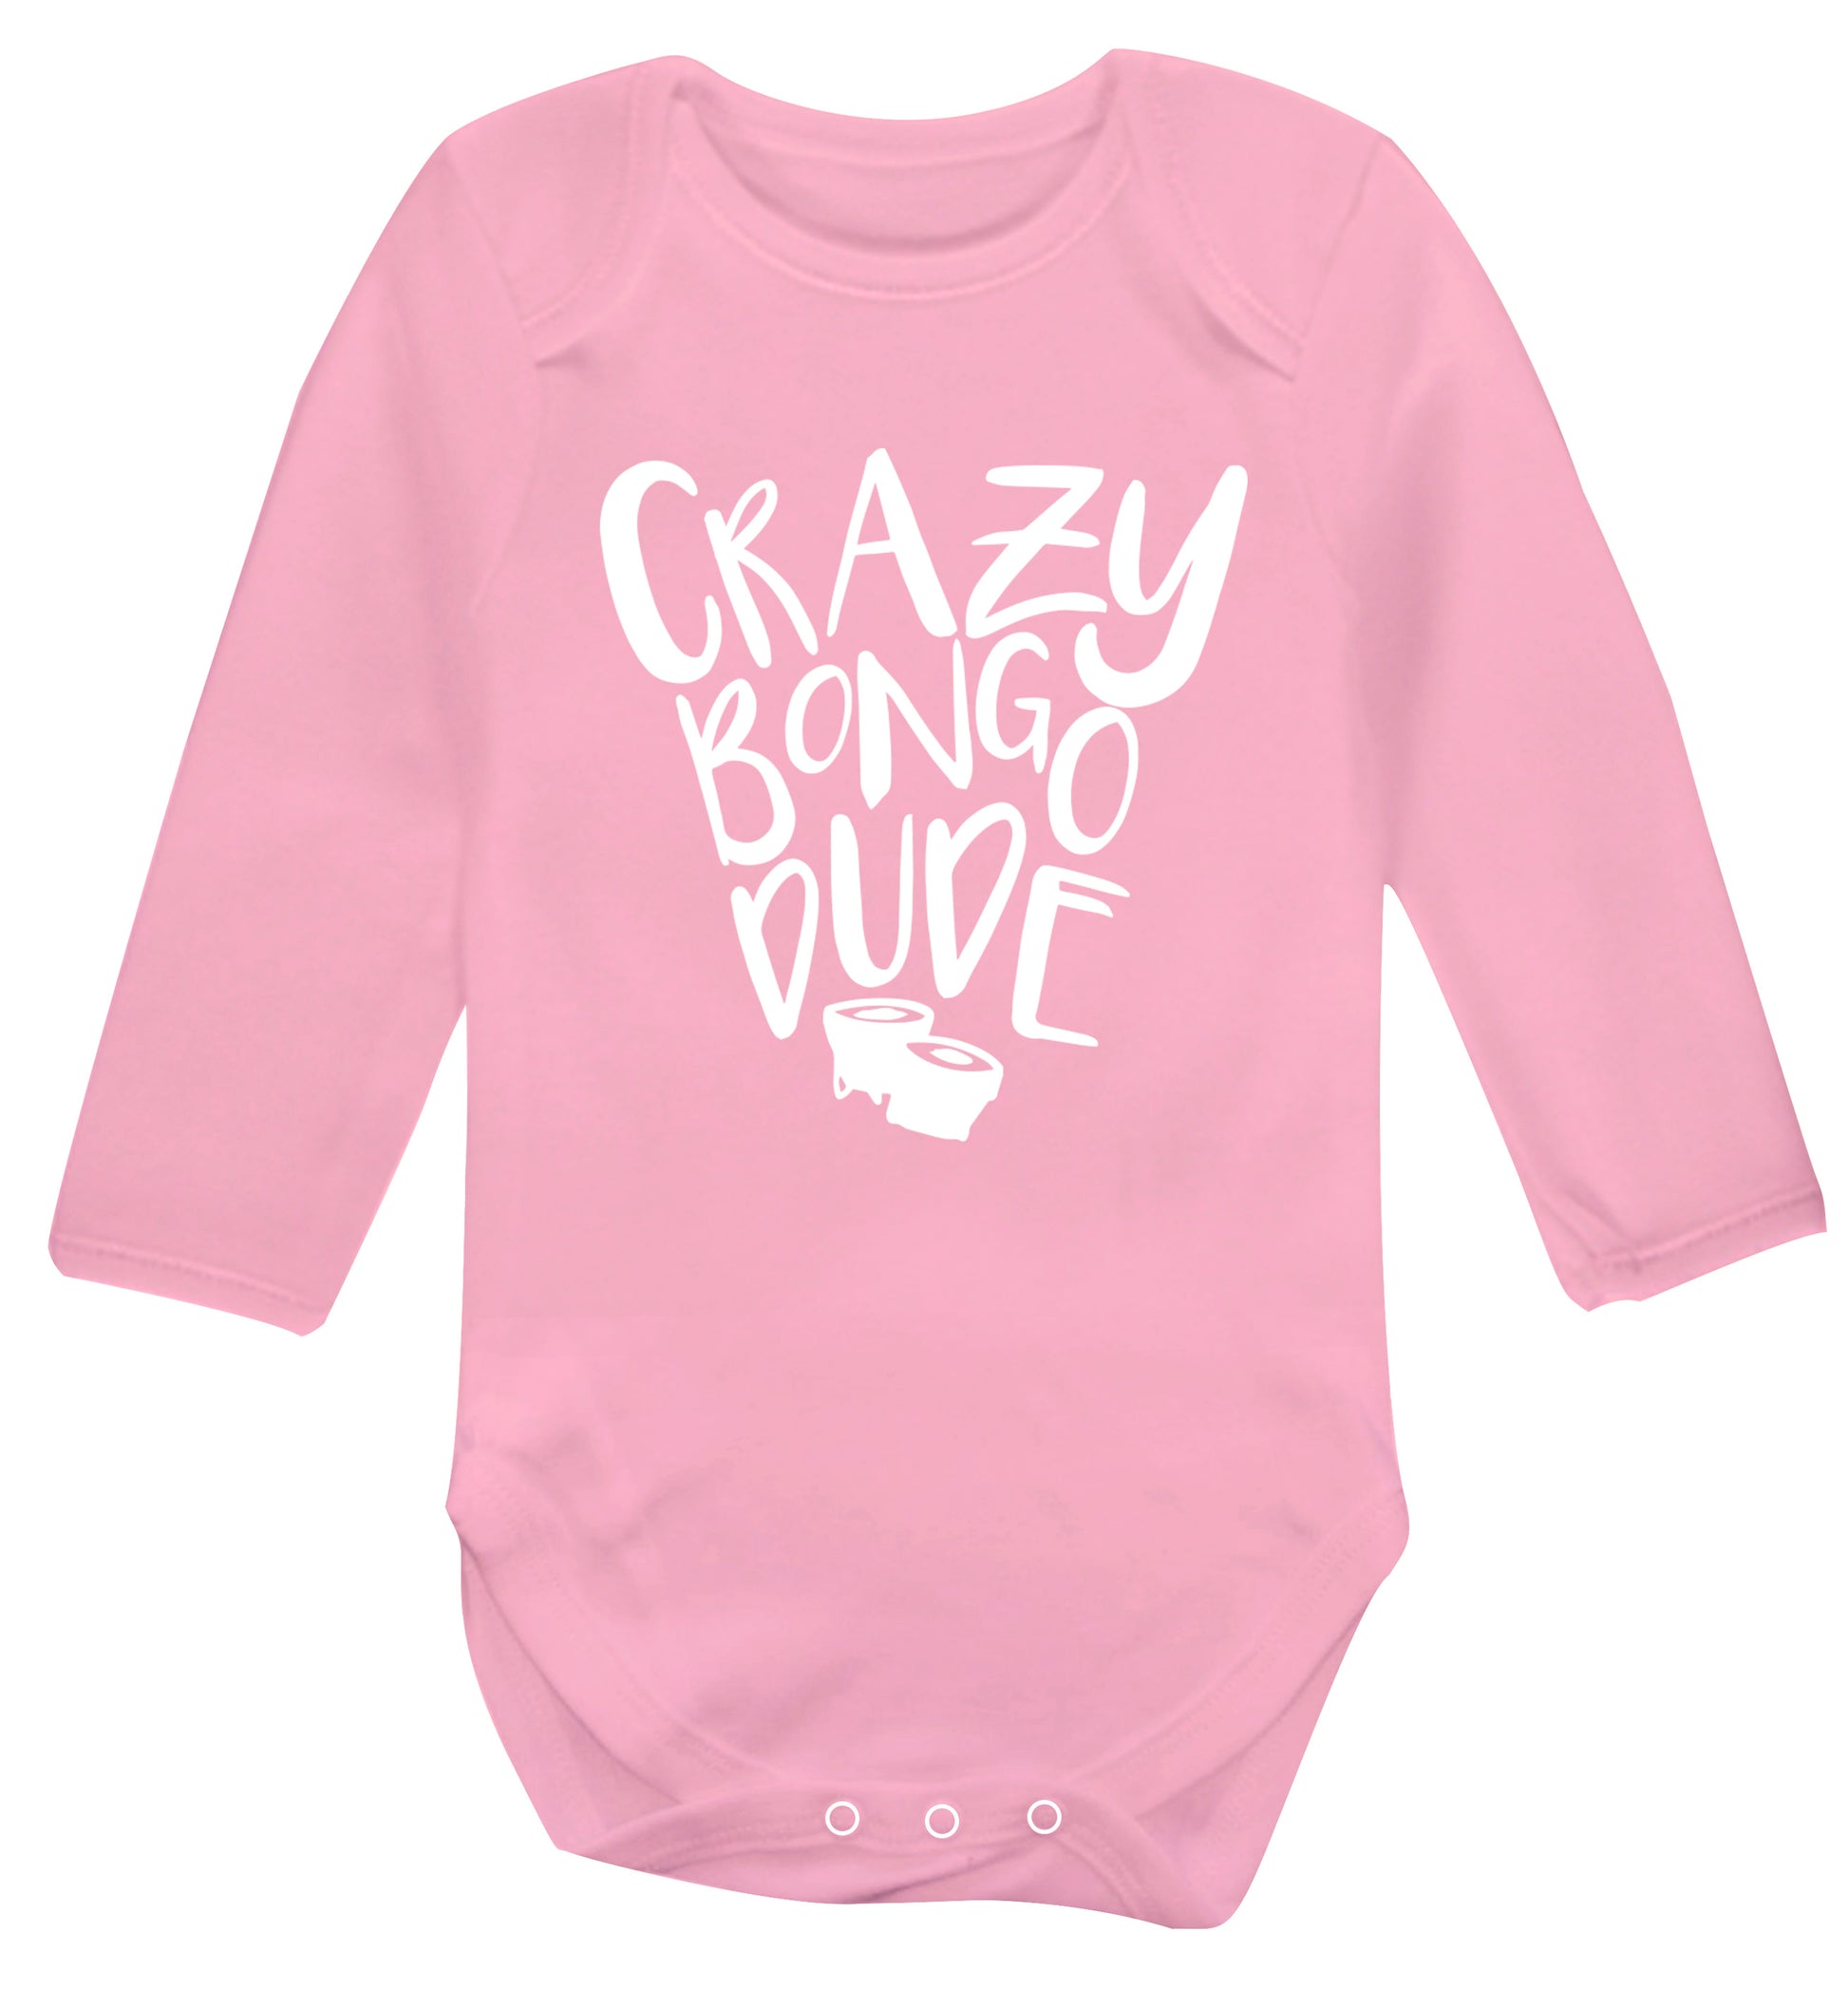 Crazy bongo dude Baby Vest long sleeved pale pink 6-12 months